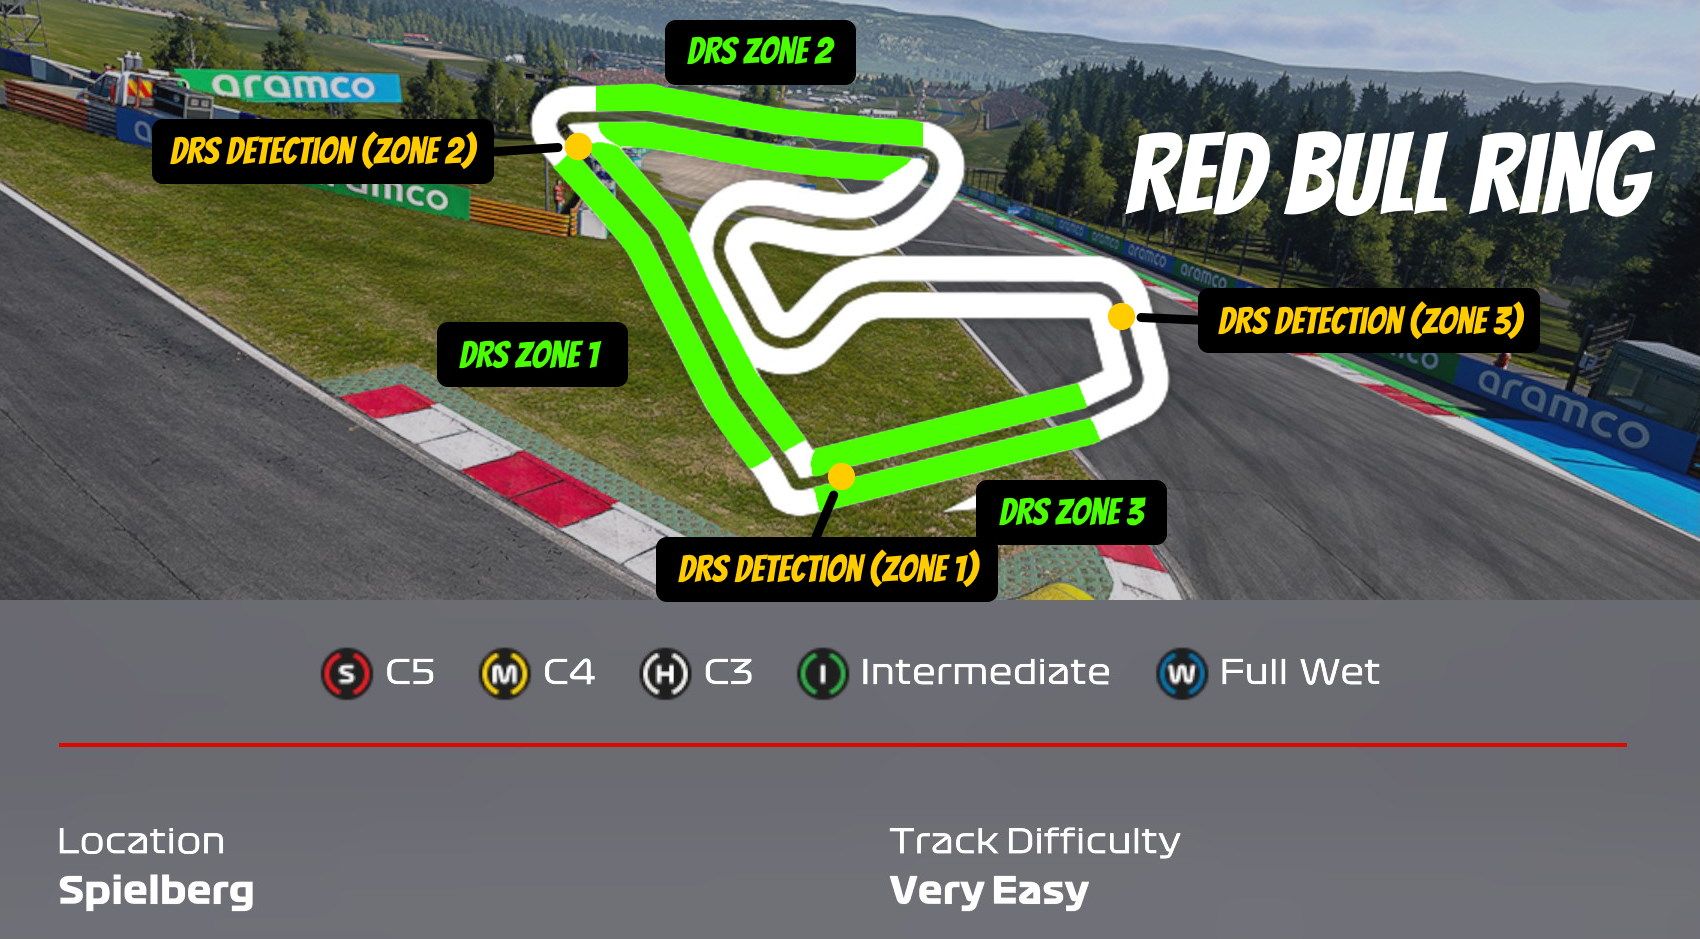 DRS zones and detection points at the Red Bull Ring in the F1 2021 game.